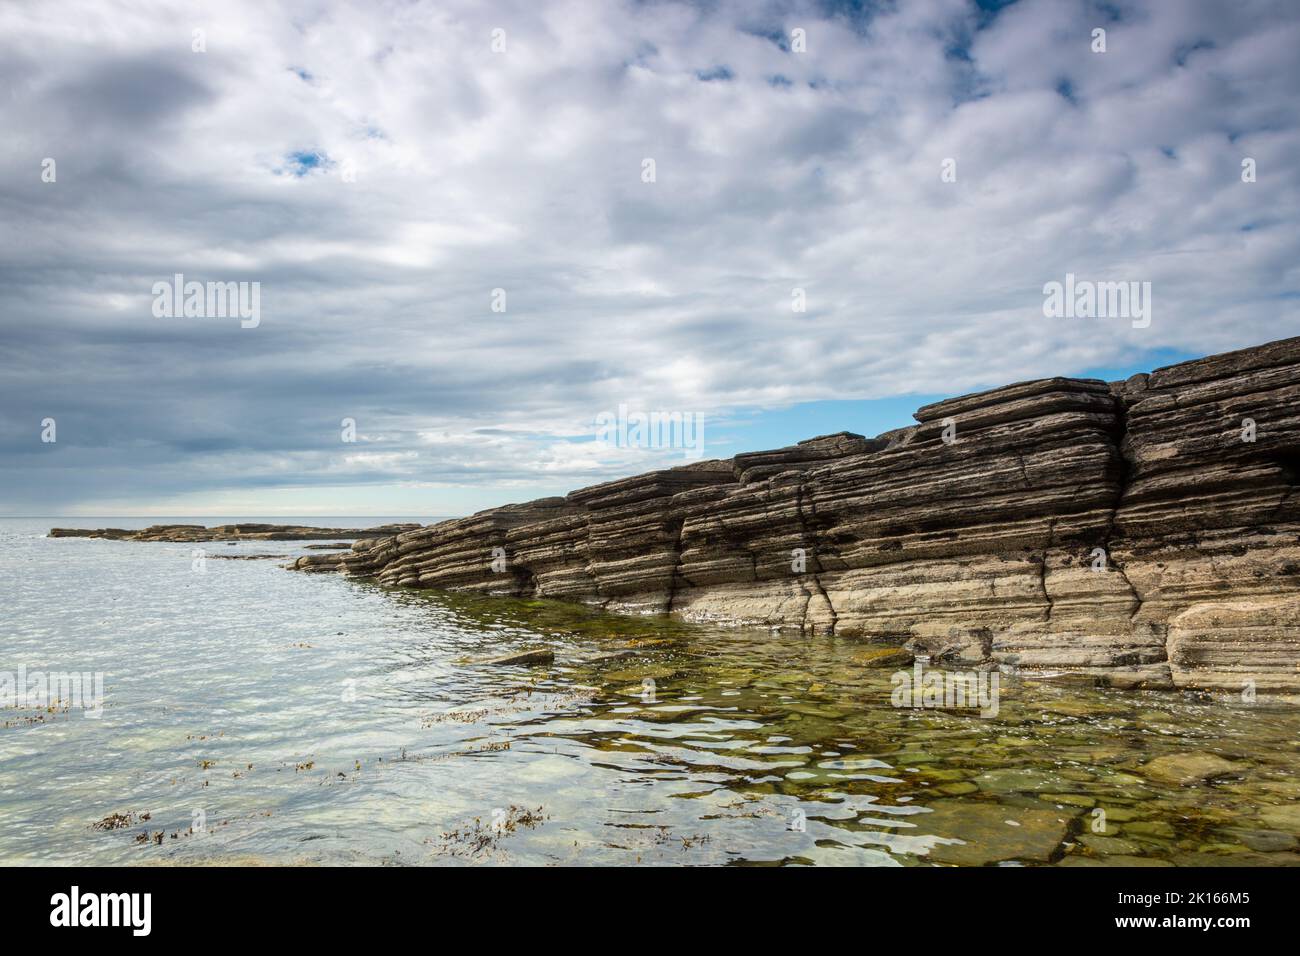 Rock cliffs at Marwick, Orkney mainland, showing strata Stock Photo